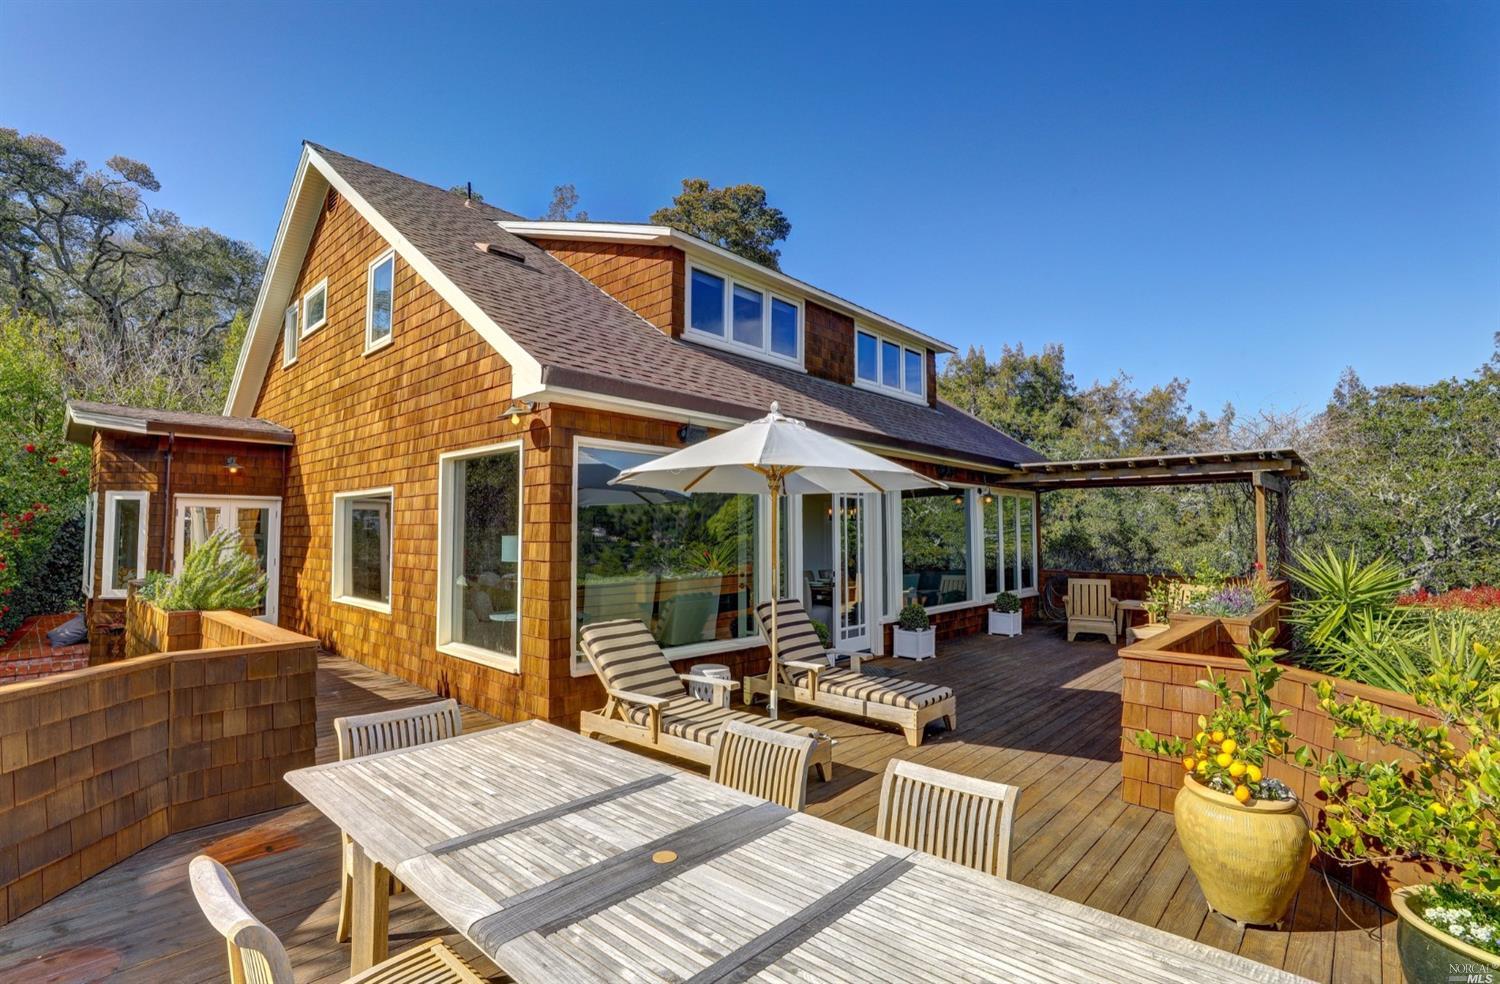 Brown-shingled home with deck